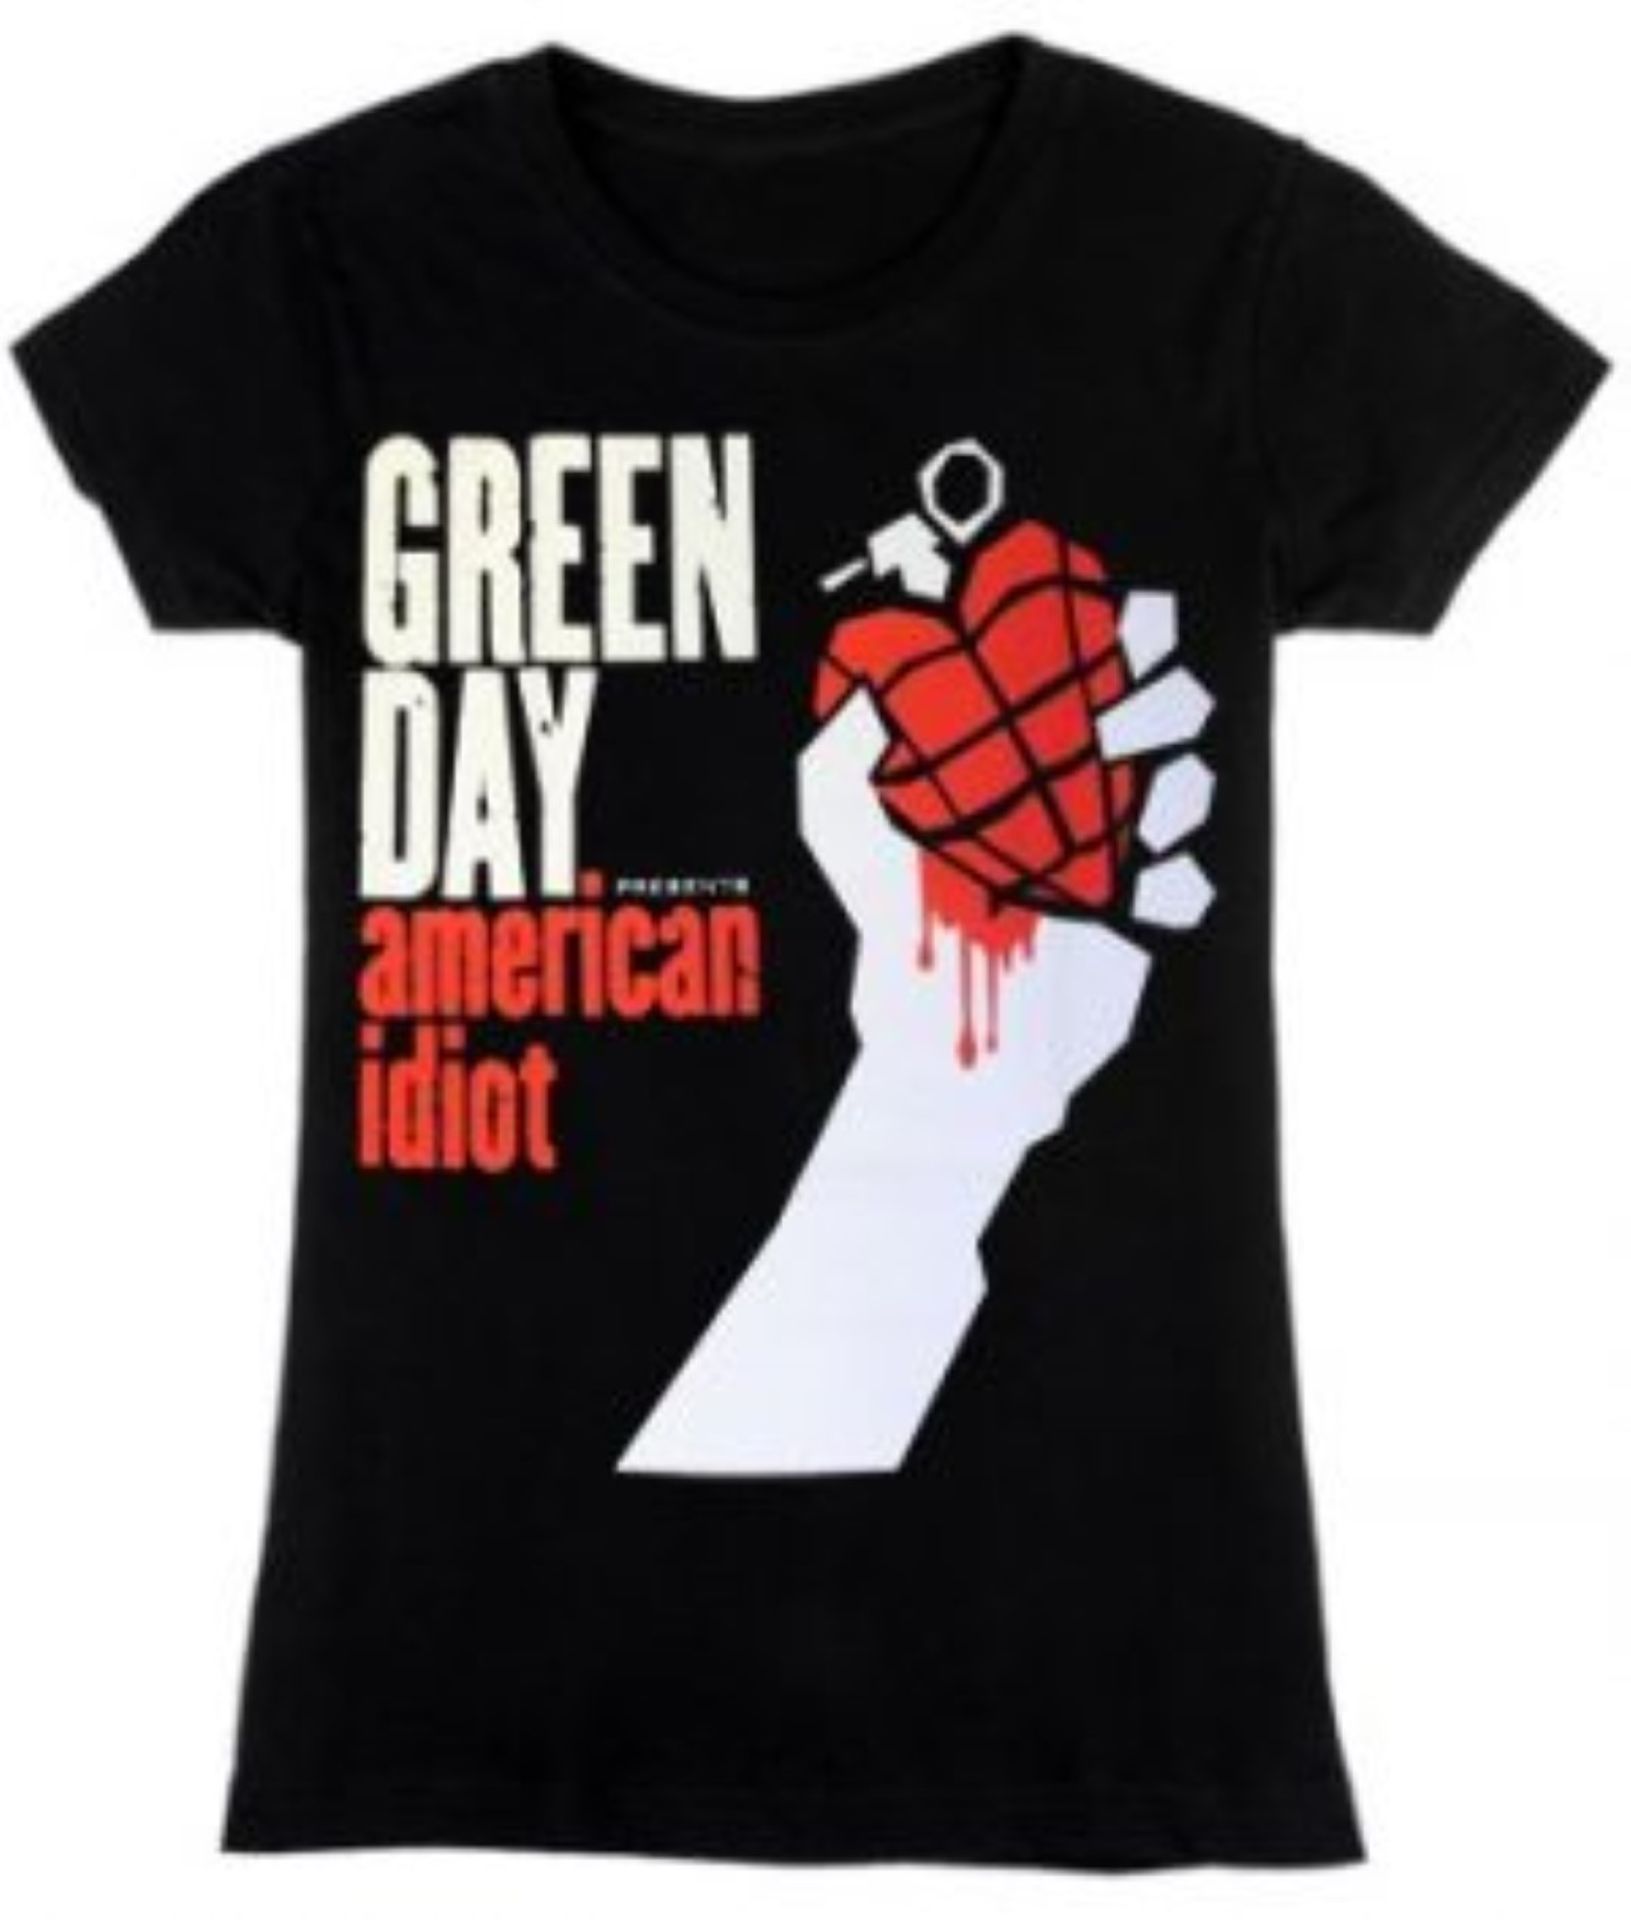 3 x Rock and Roll Themed Def Leppard, AC/DC and Green Day Ladies T-Shirts - Size: Large - - Image 2 of 6